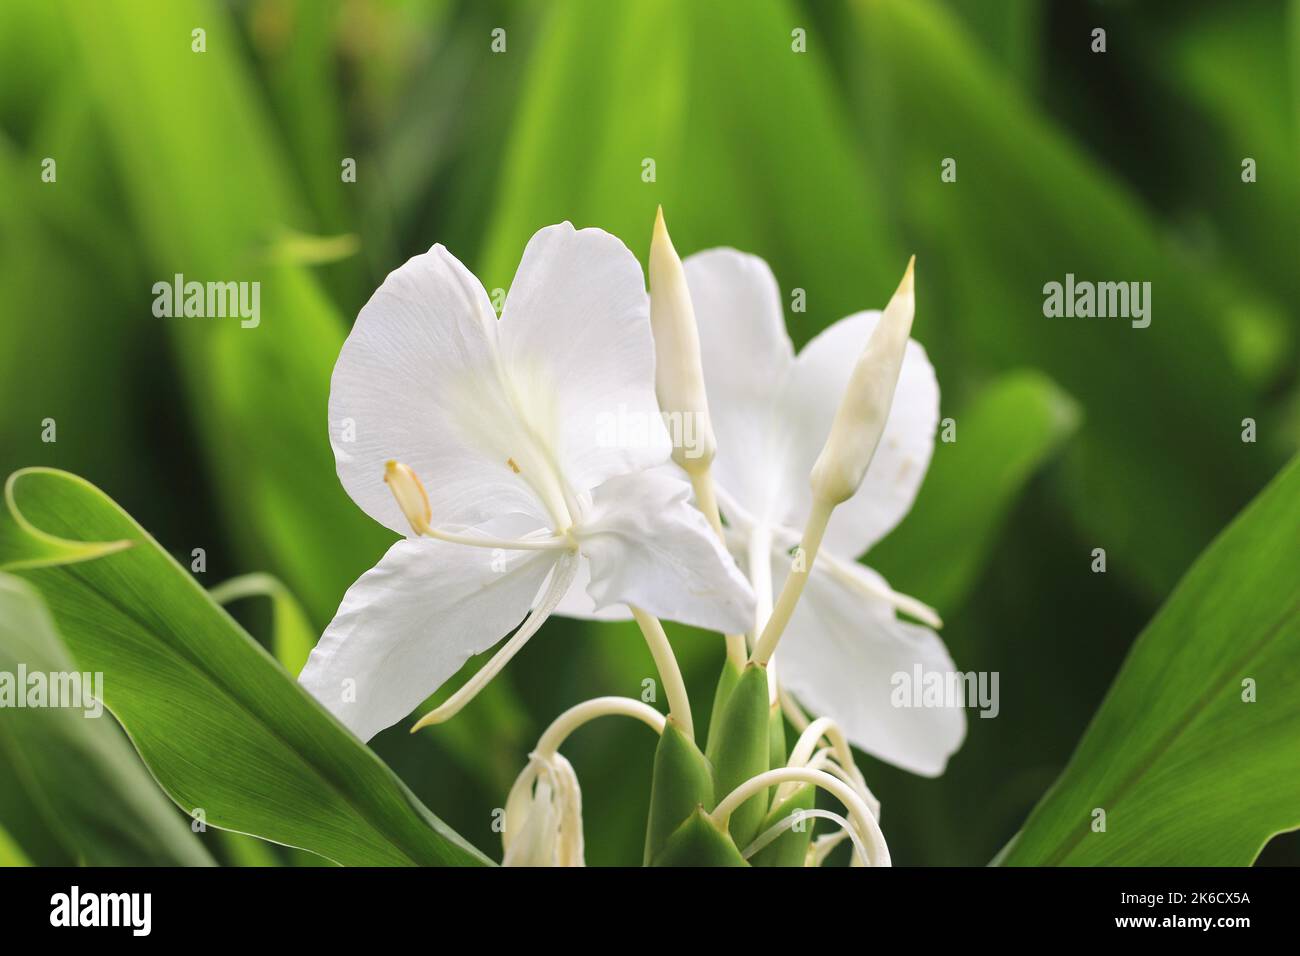 Butterfly Ginger,Ginger Lily,Butterfly Lily,Garland Flower,beautiful white flowers blooming in the garden Stock Photo